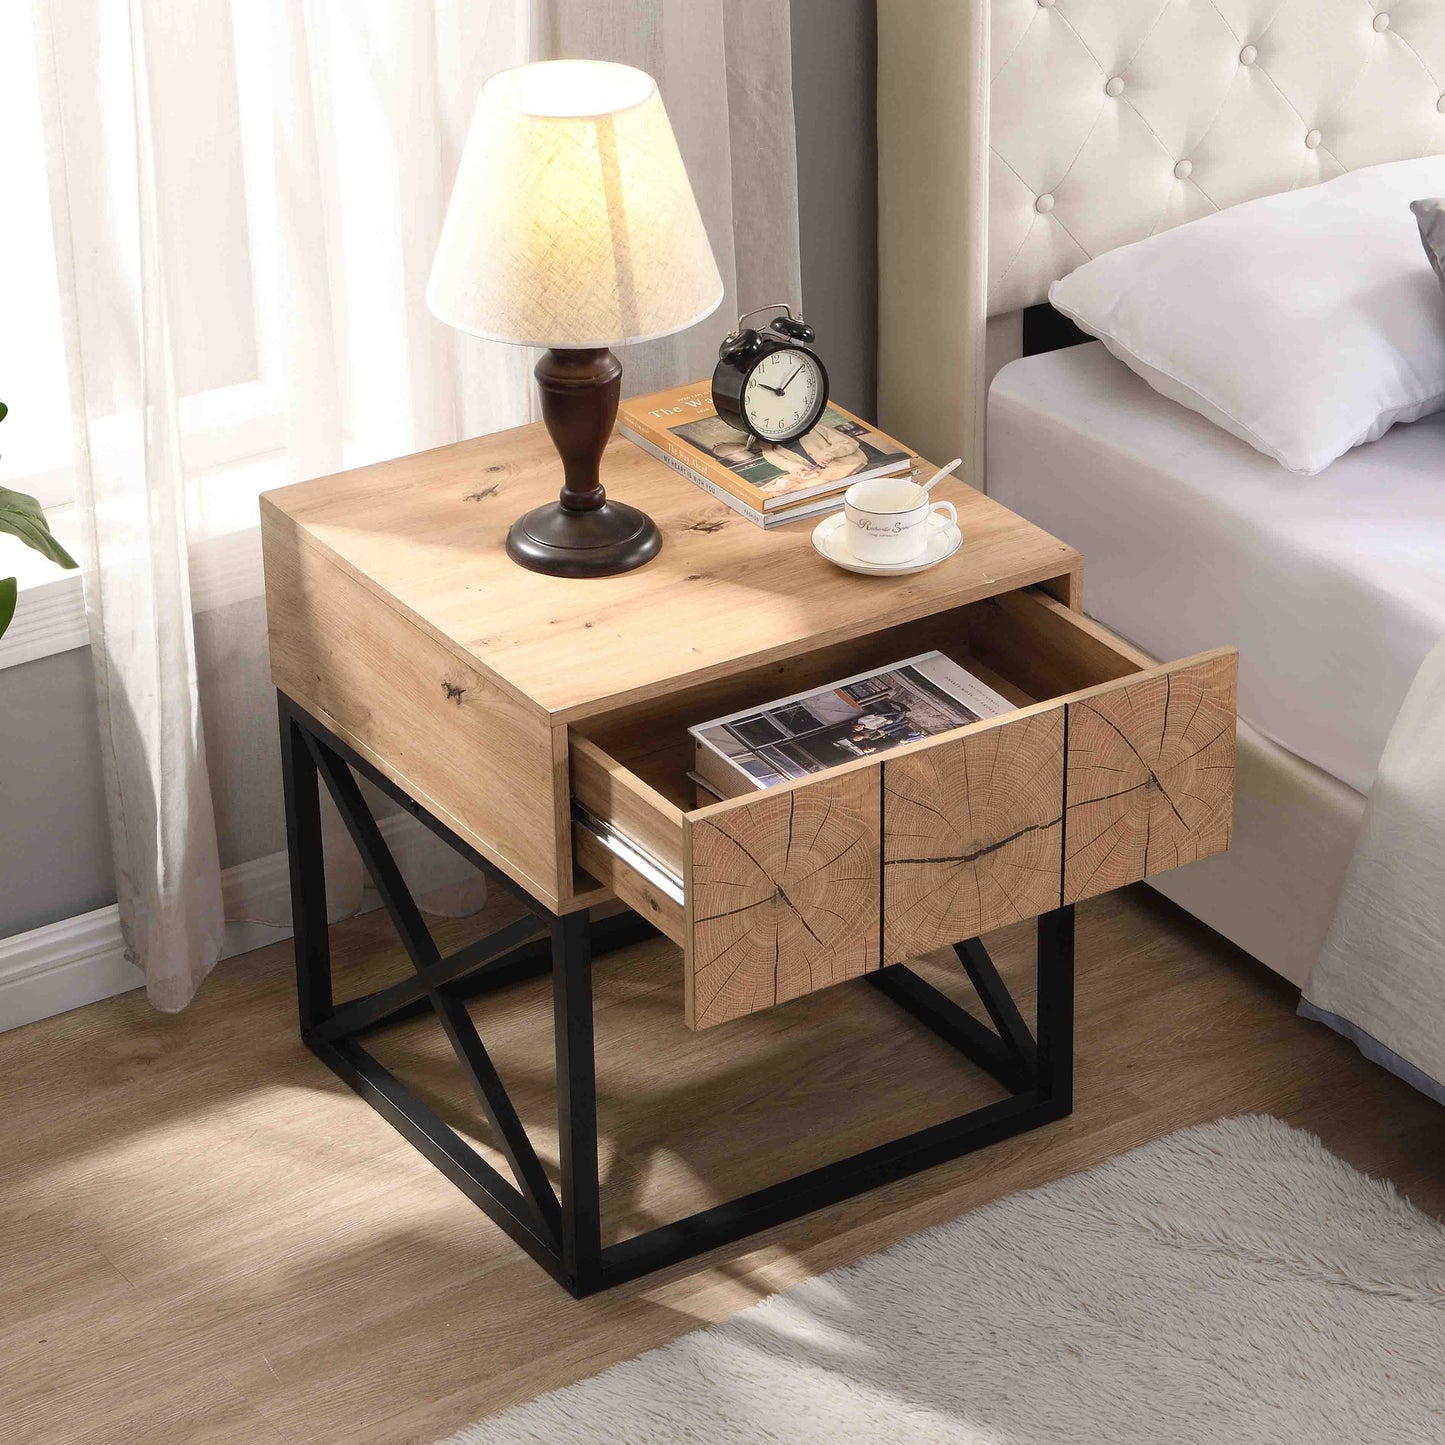 21.65'' Luxury Night Stand with Drawer, Metal and Wood End Table,Industrial Bedside Table for Living Room, Bedroom&Office